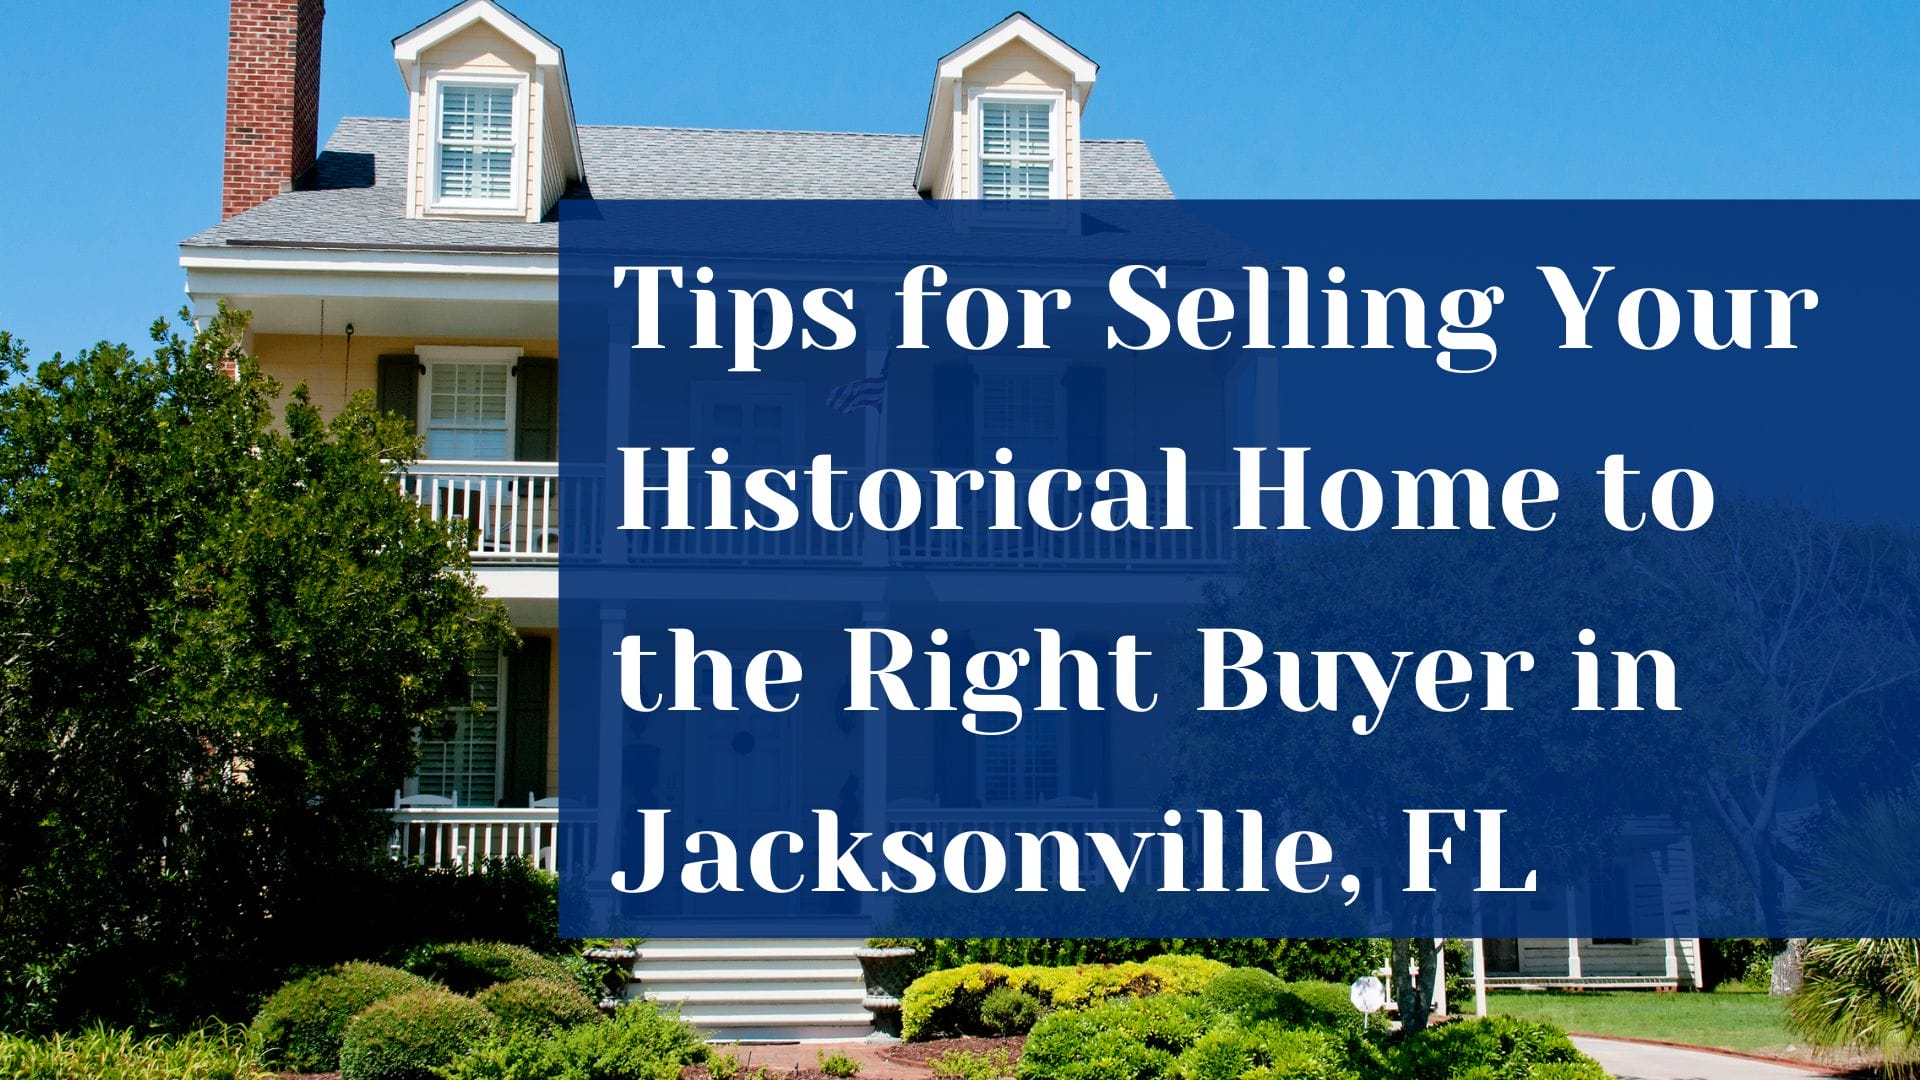 Tips for Selling Your Historical Home to the Right Buyer in Jacksonville, FL